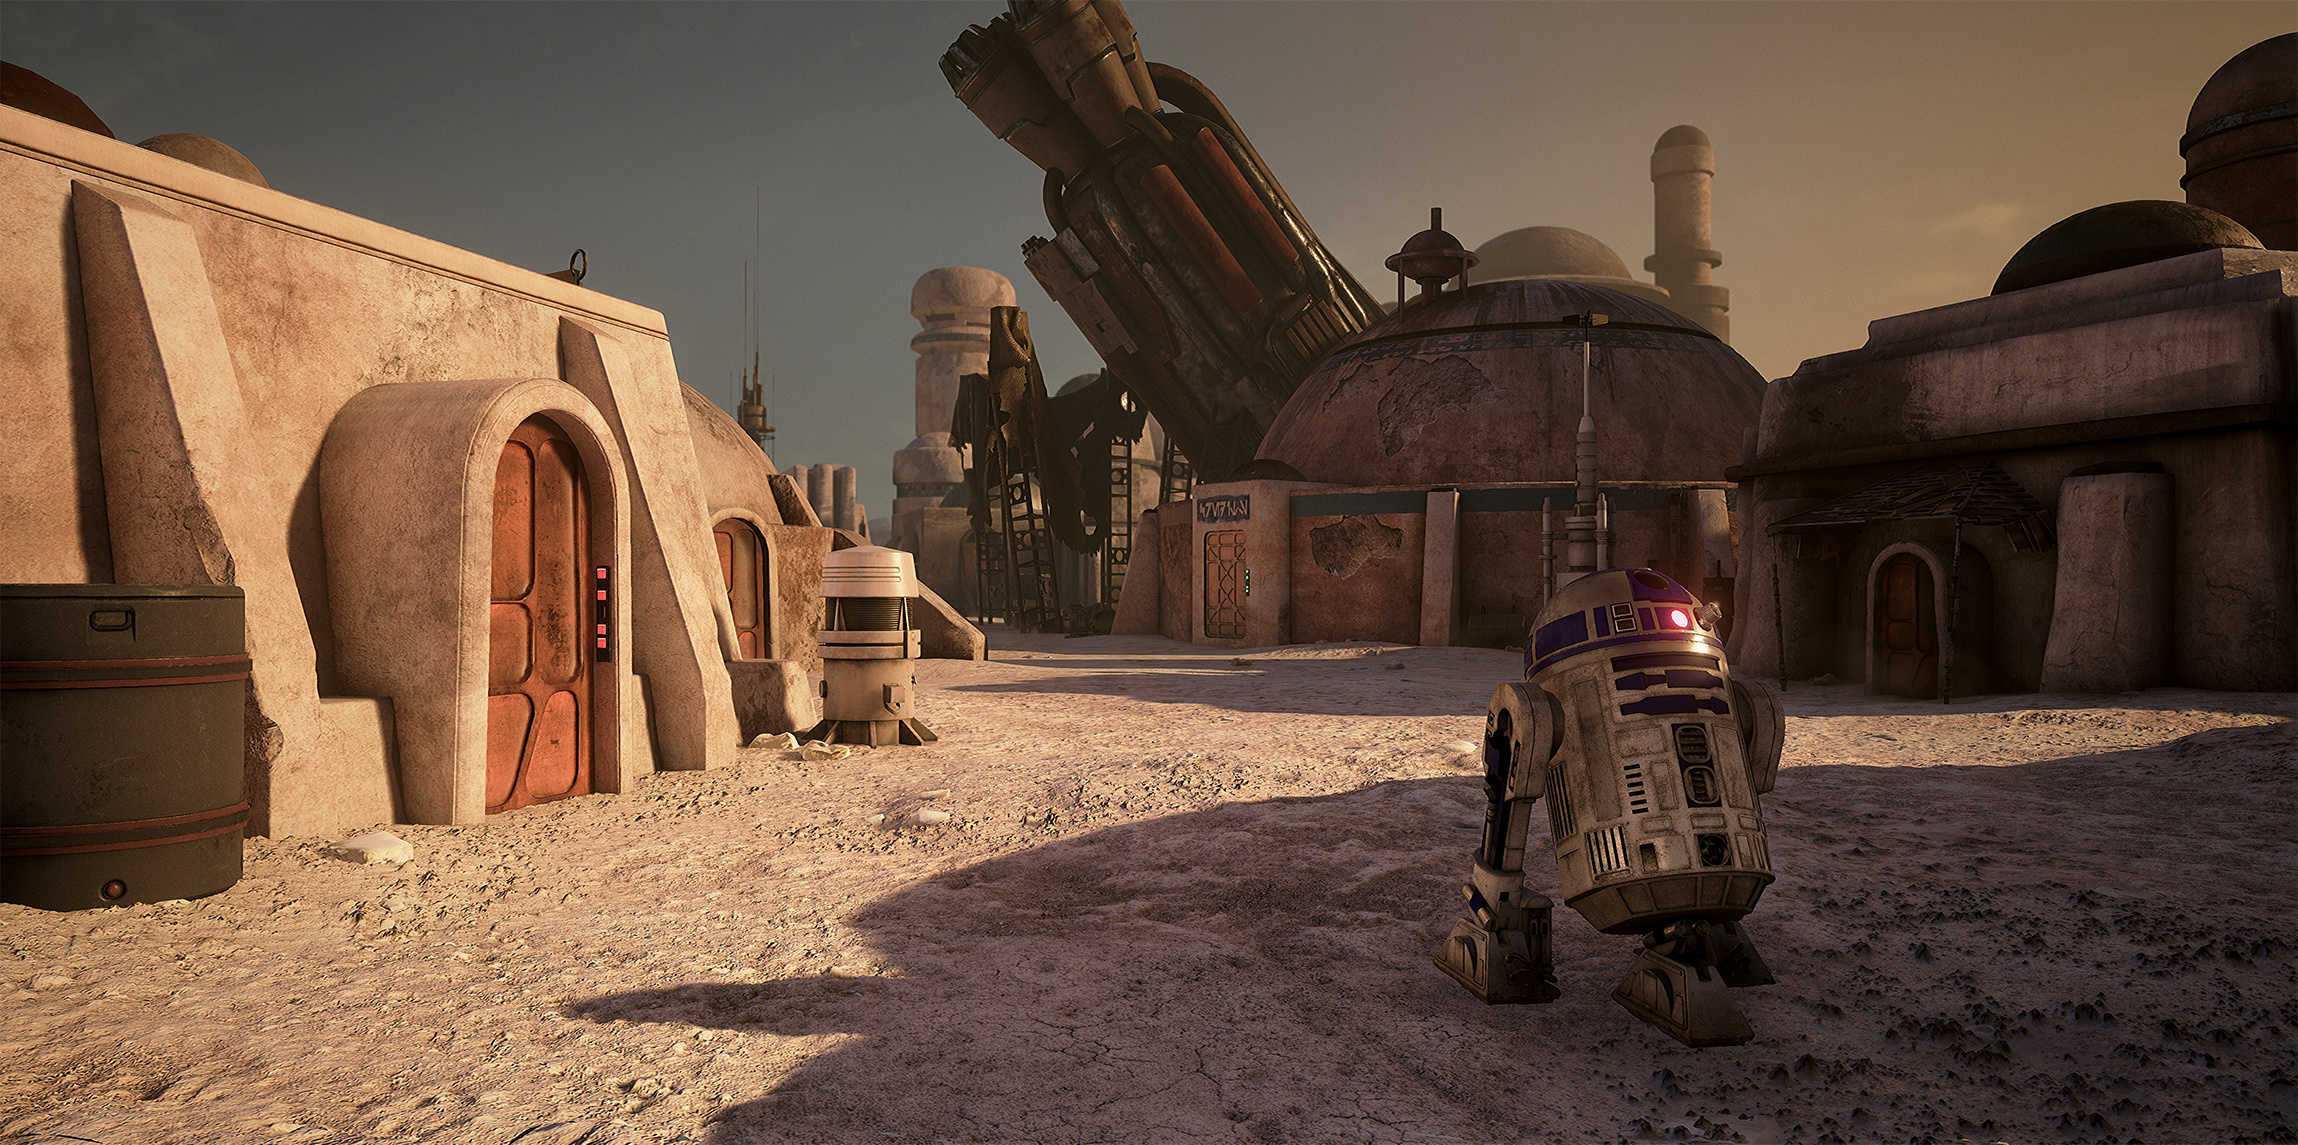 The Unreal Engine 4 Recreation Of Star Wars Looks Real Good